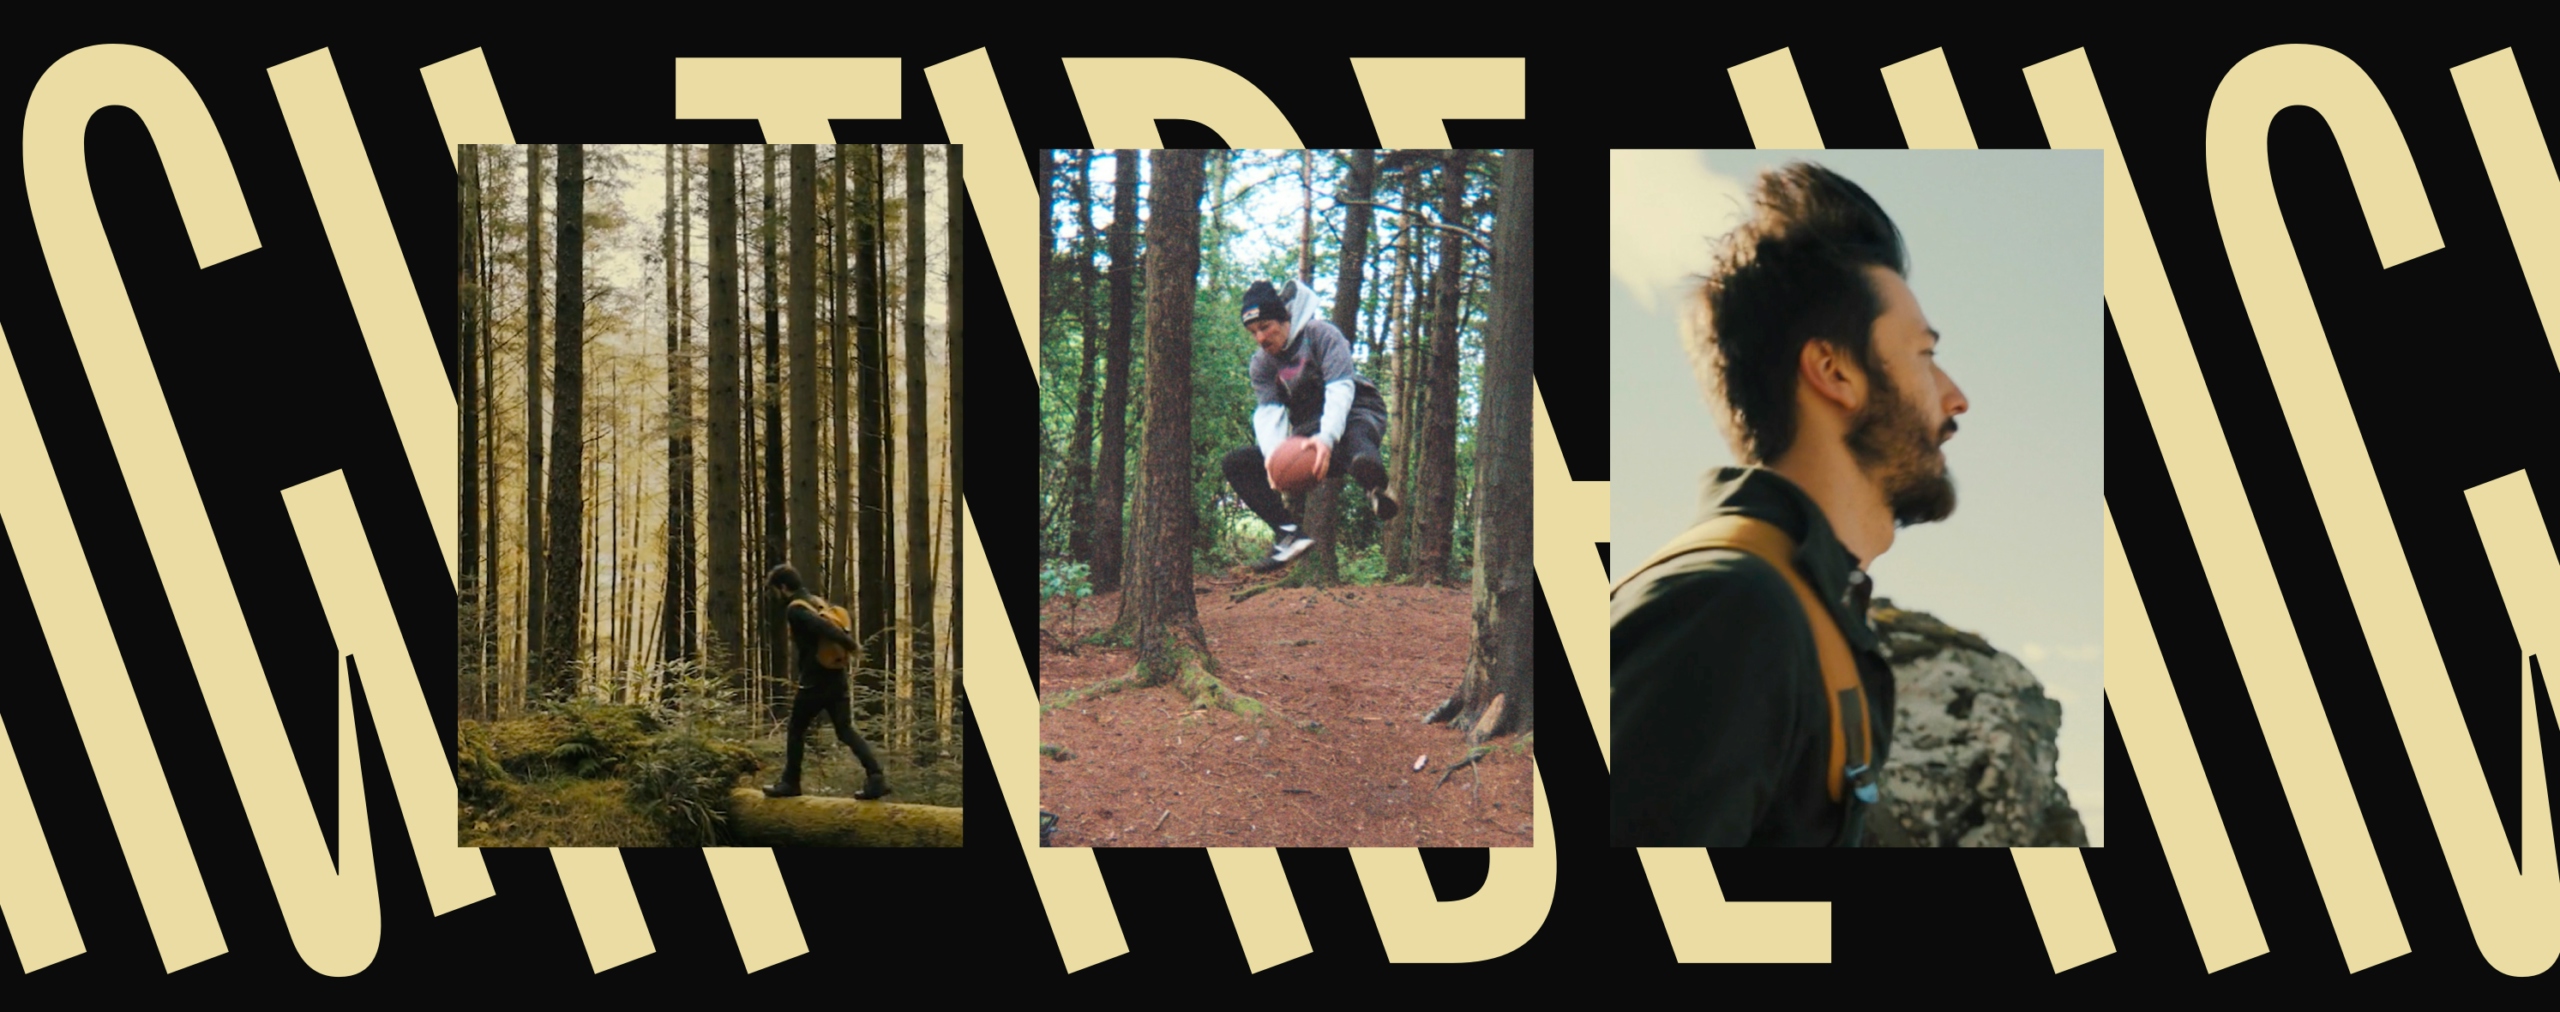 A black image with the “High Tide” logo has triptych images overlaid on it. The first image is of someone walking in a forest. The second is of someone tuck-jumping in a forest, The third image is of a windswept bearded person in profile.